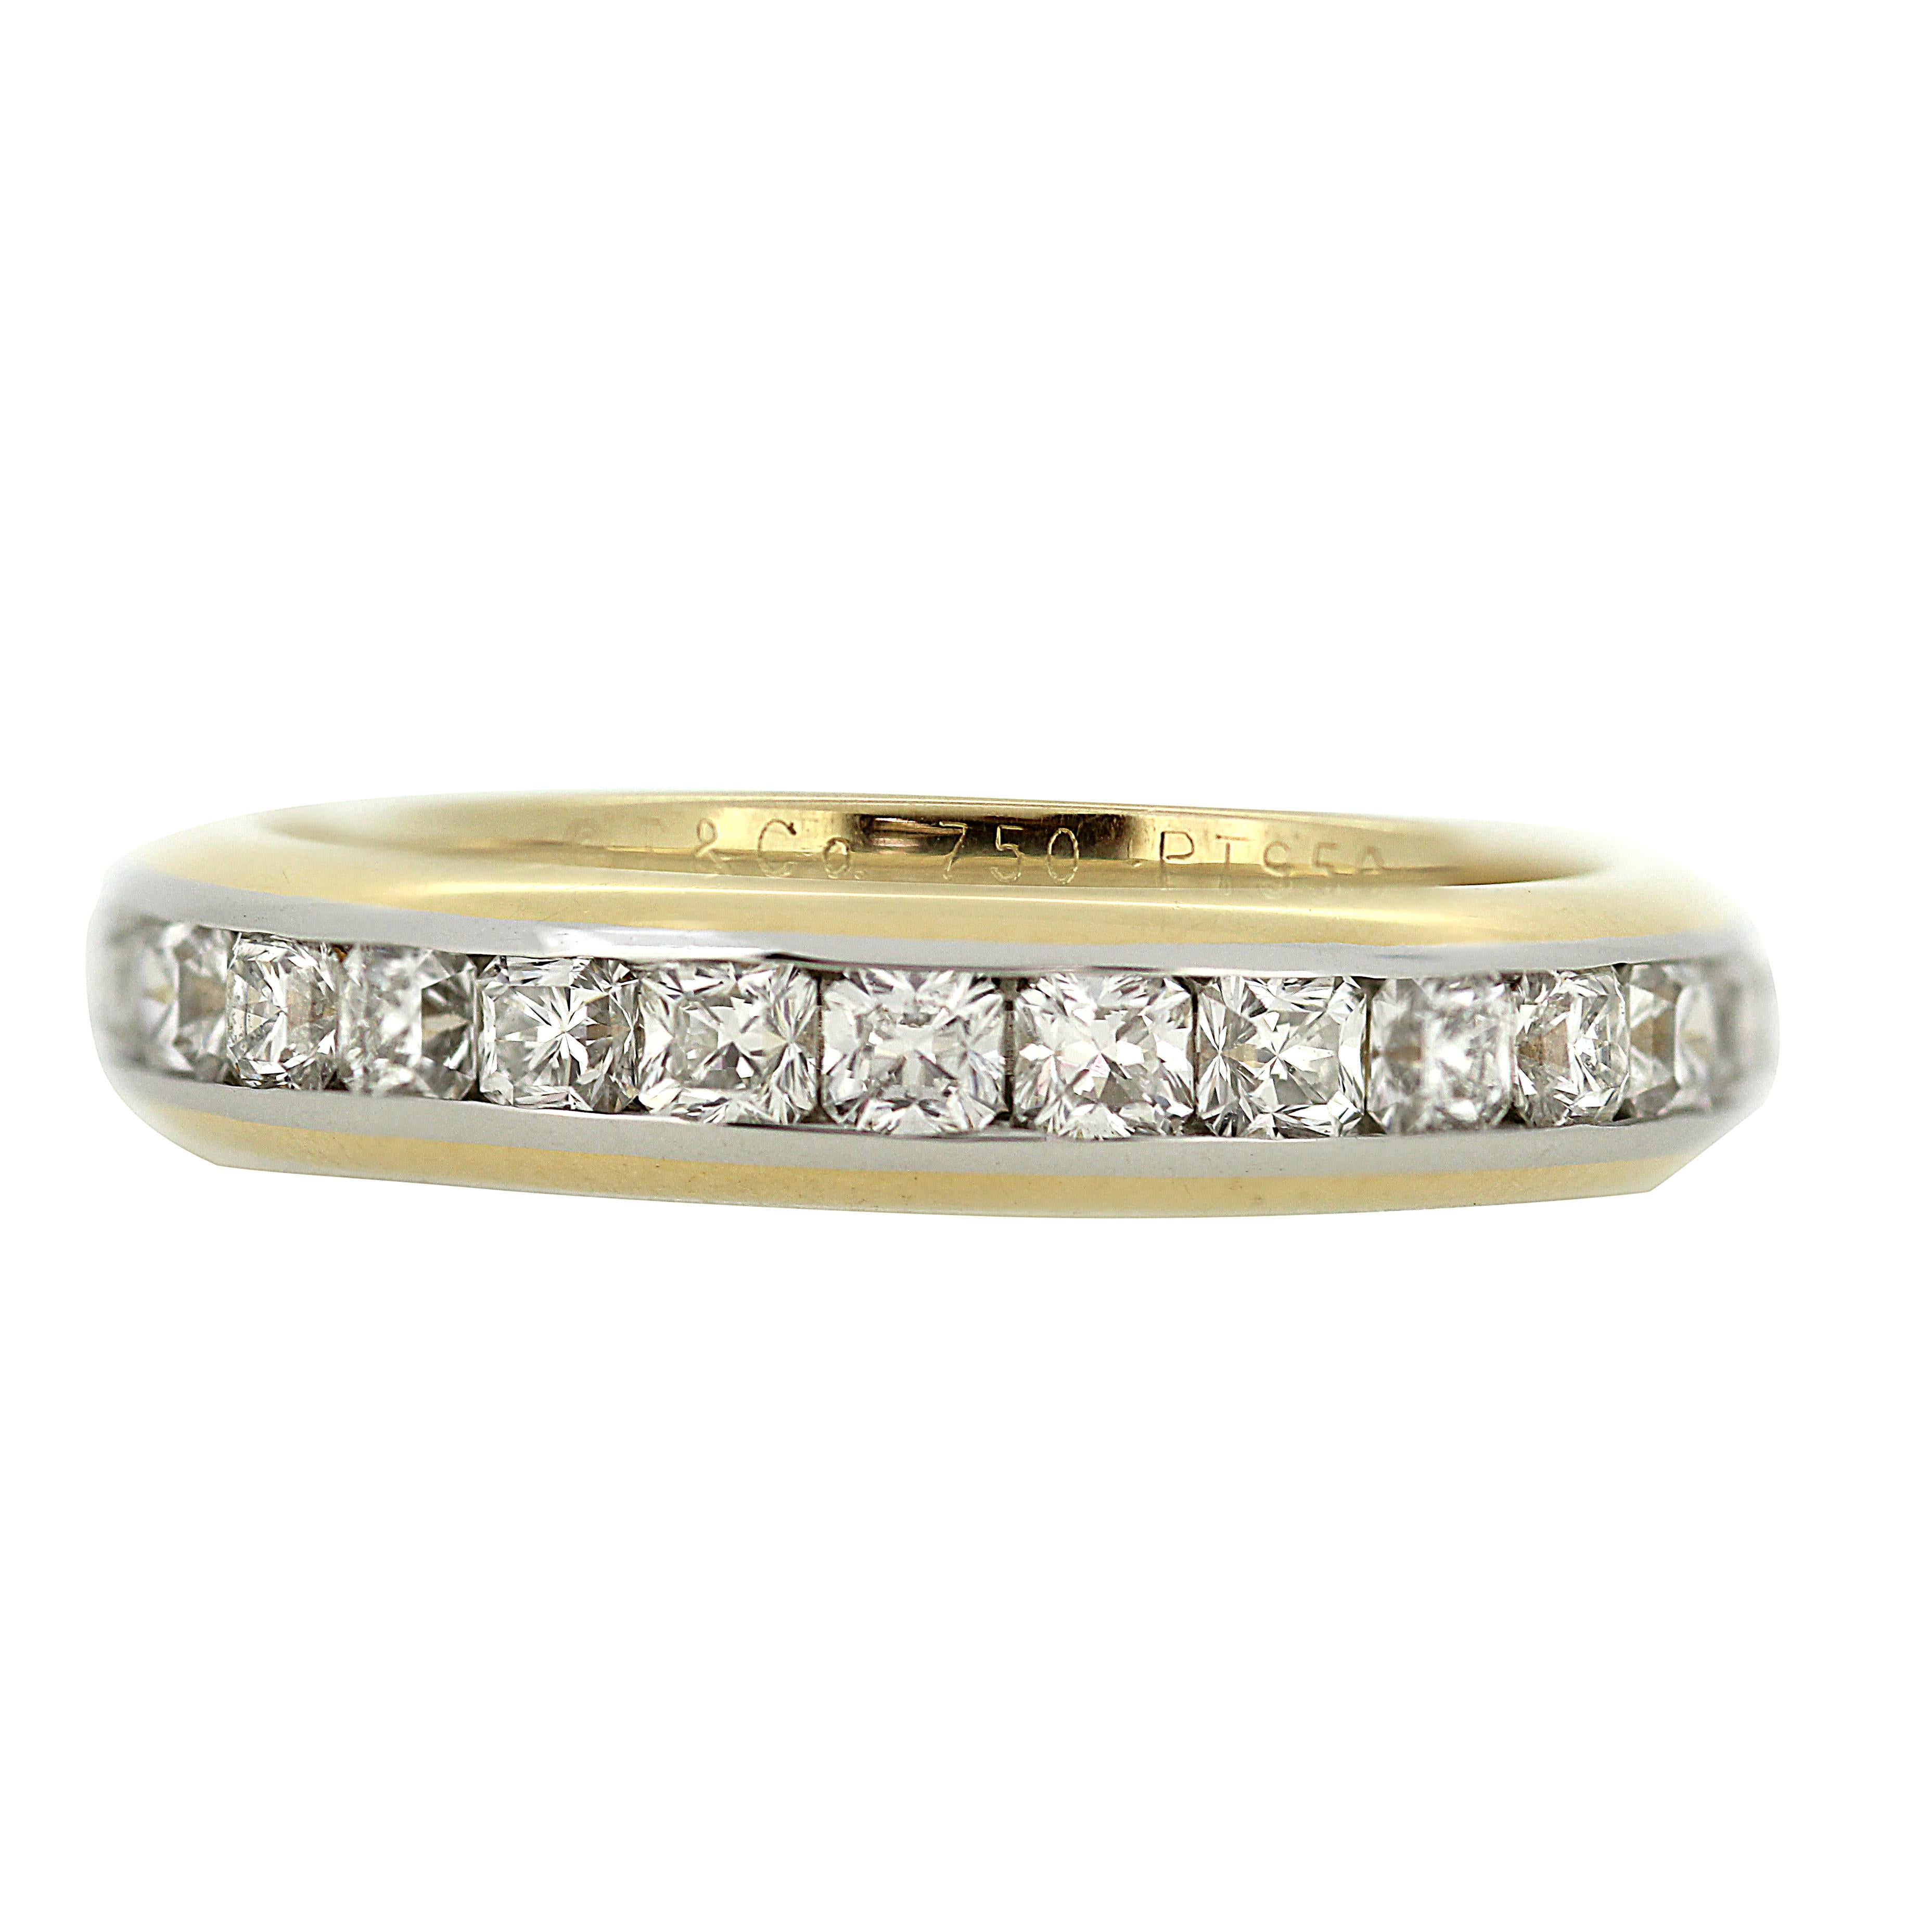 A Tiffany & Co. 18ct Yellow Gold and Platinum Lucida Diamond Eternity Ring